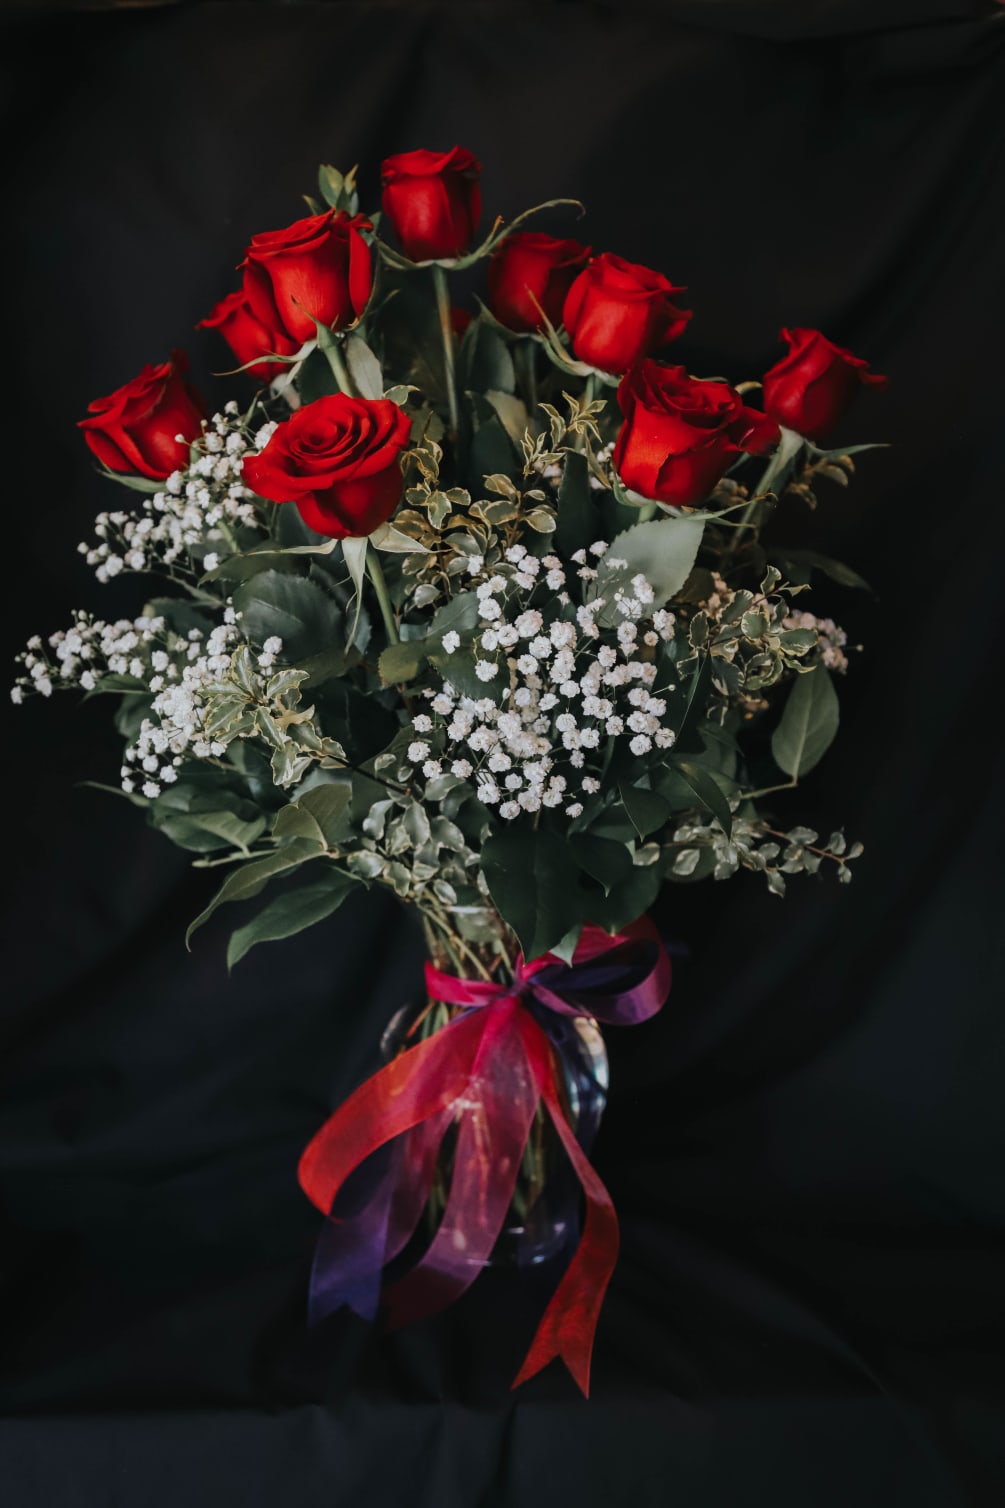 12 beautiful, velvety red roses designed in a vase with premium greenery